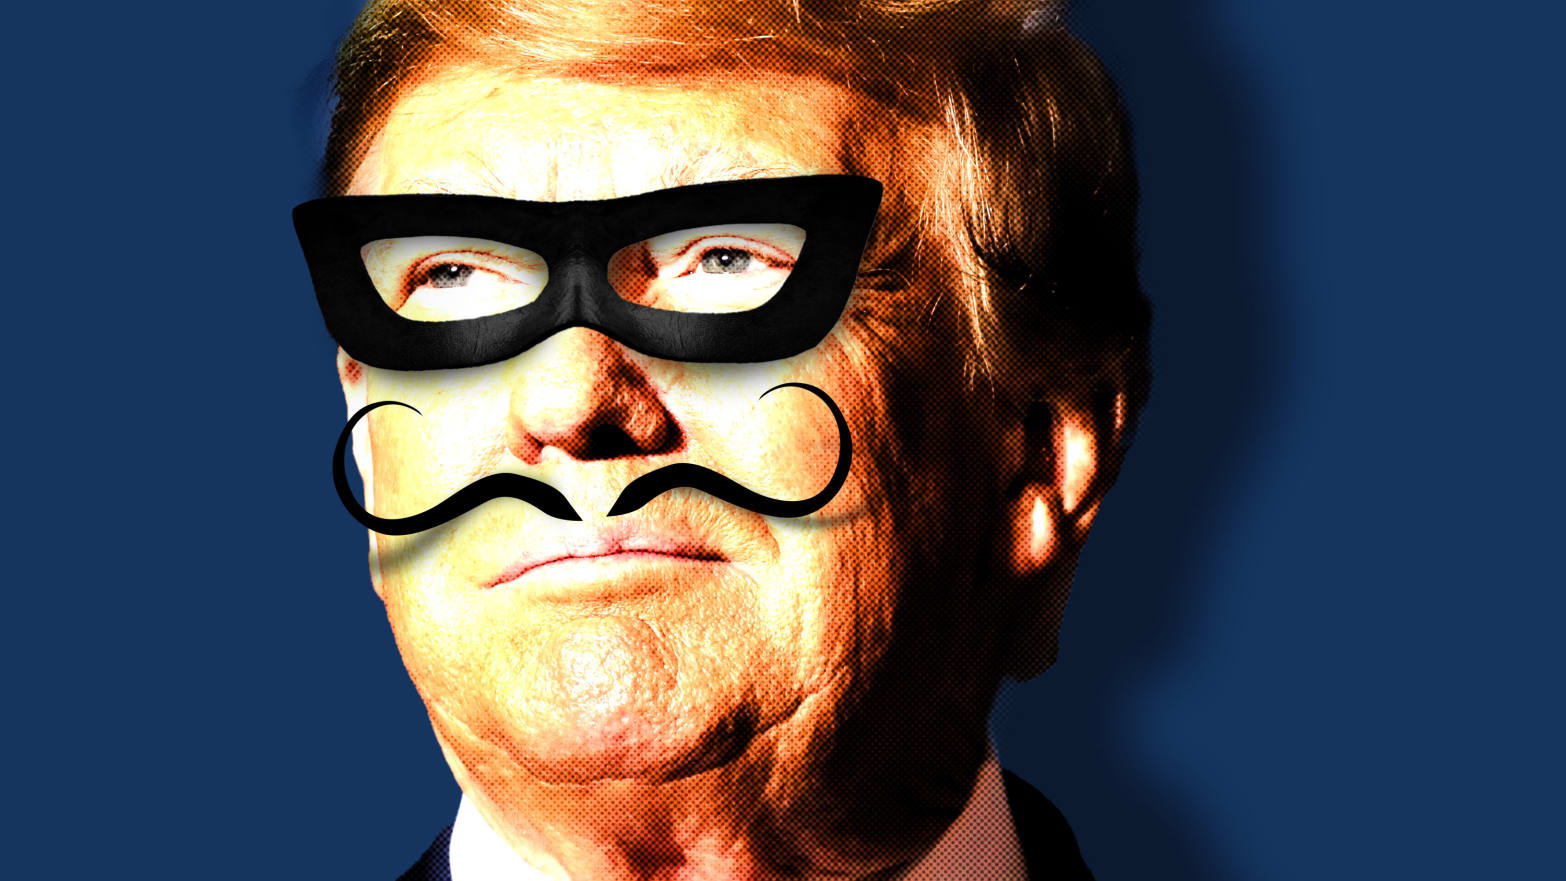 Photo illustration of Donald Trump with a black curly mustache and a black evil mask on a blue background